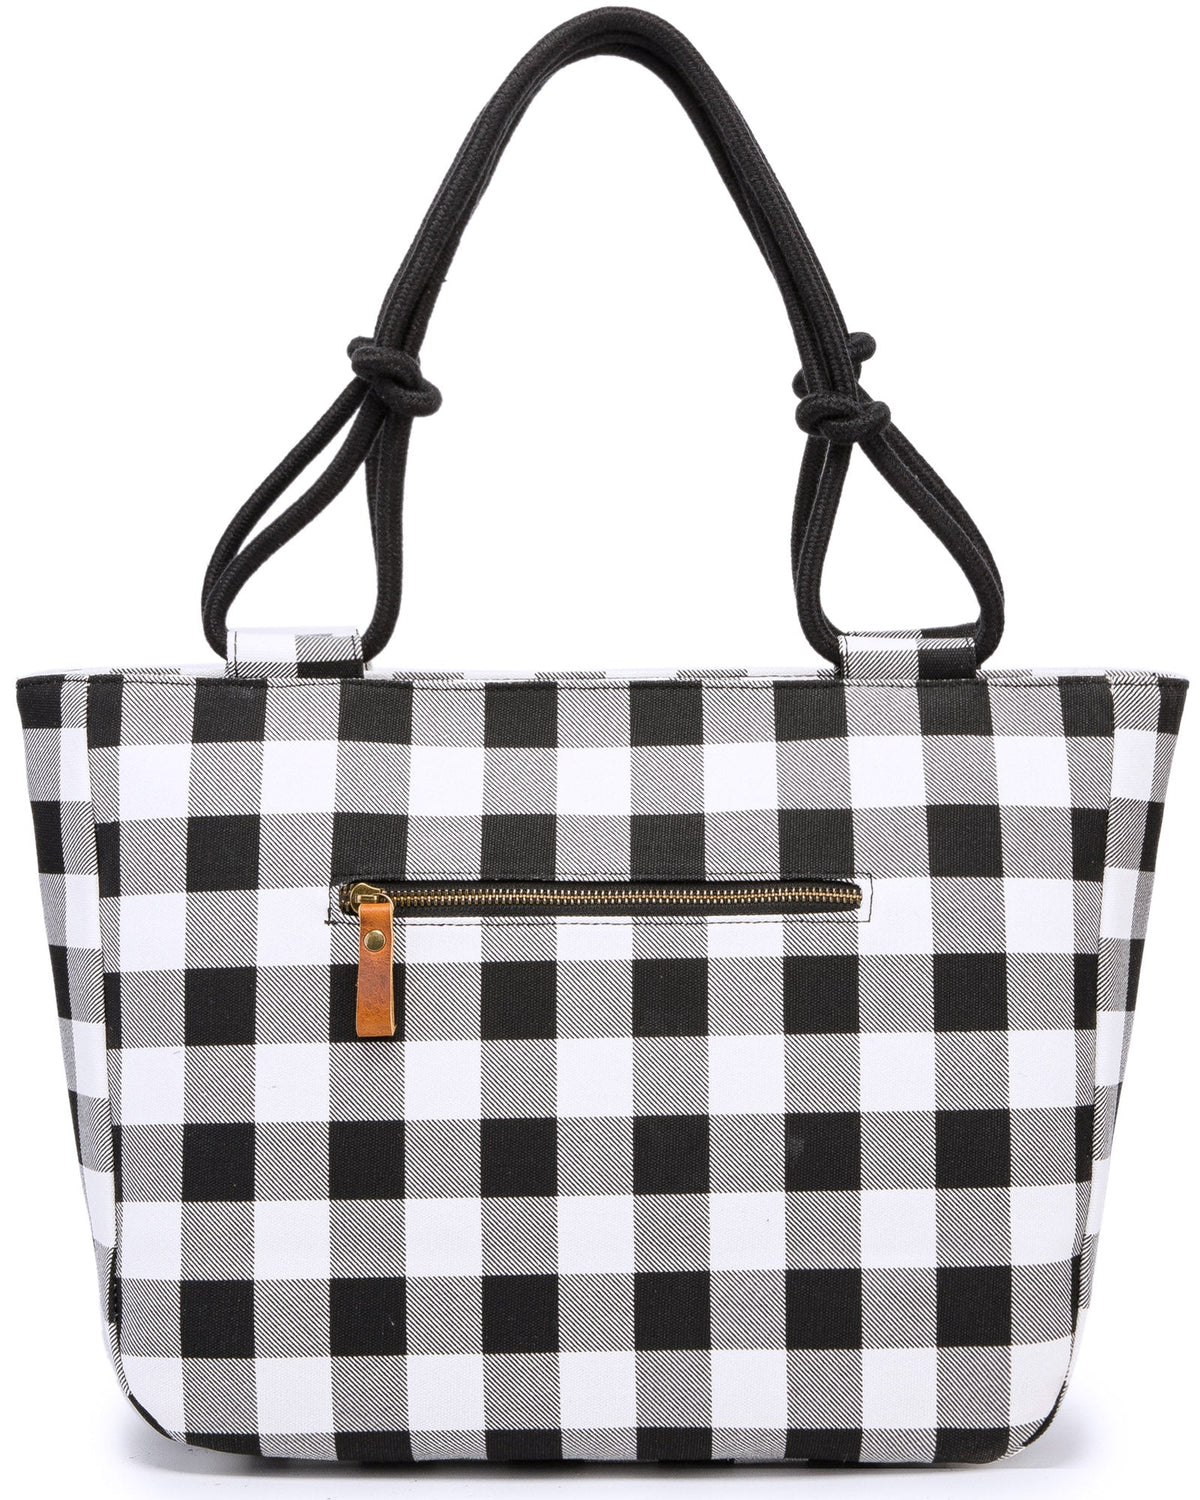 White Check Bag *BEST SELLER* - Farmhouse Is My Style